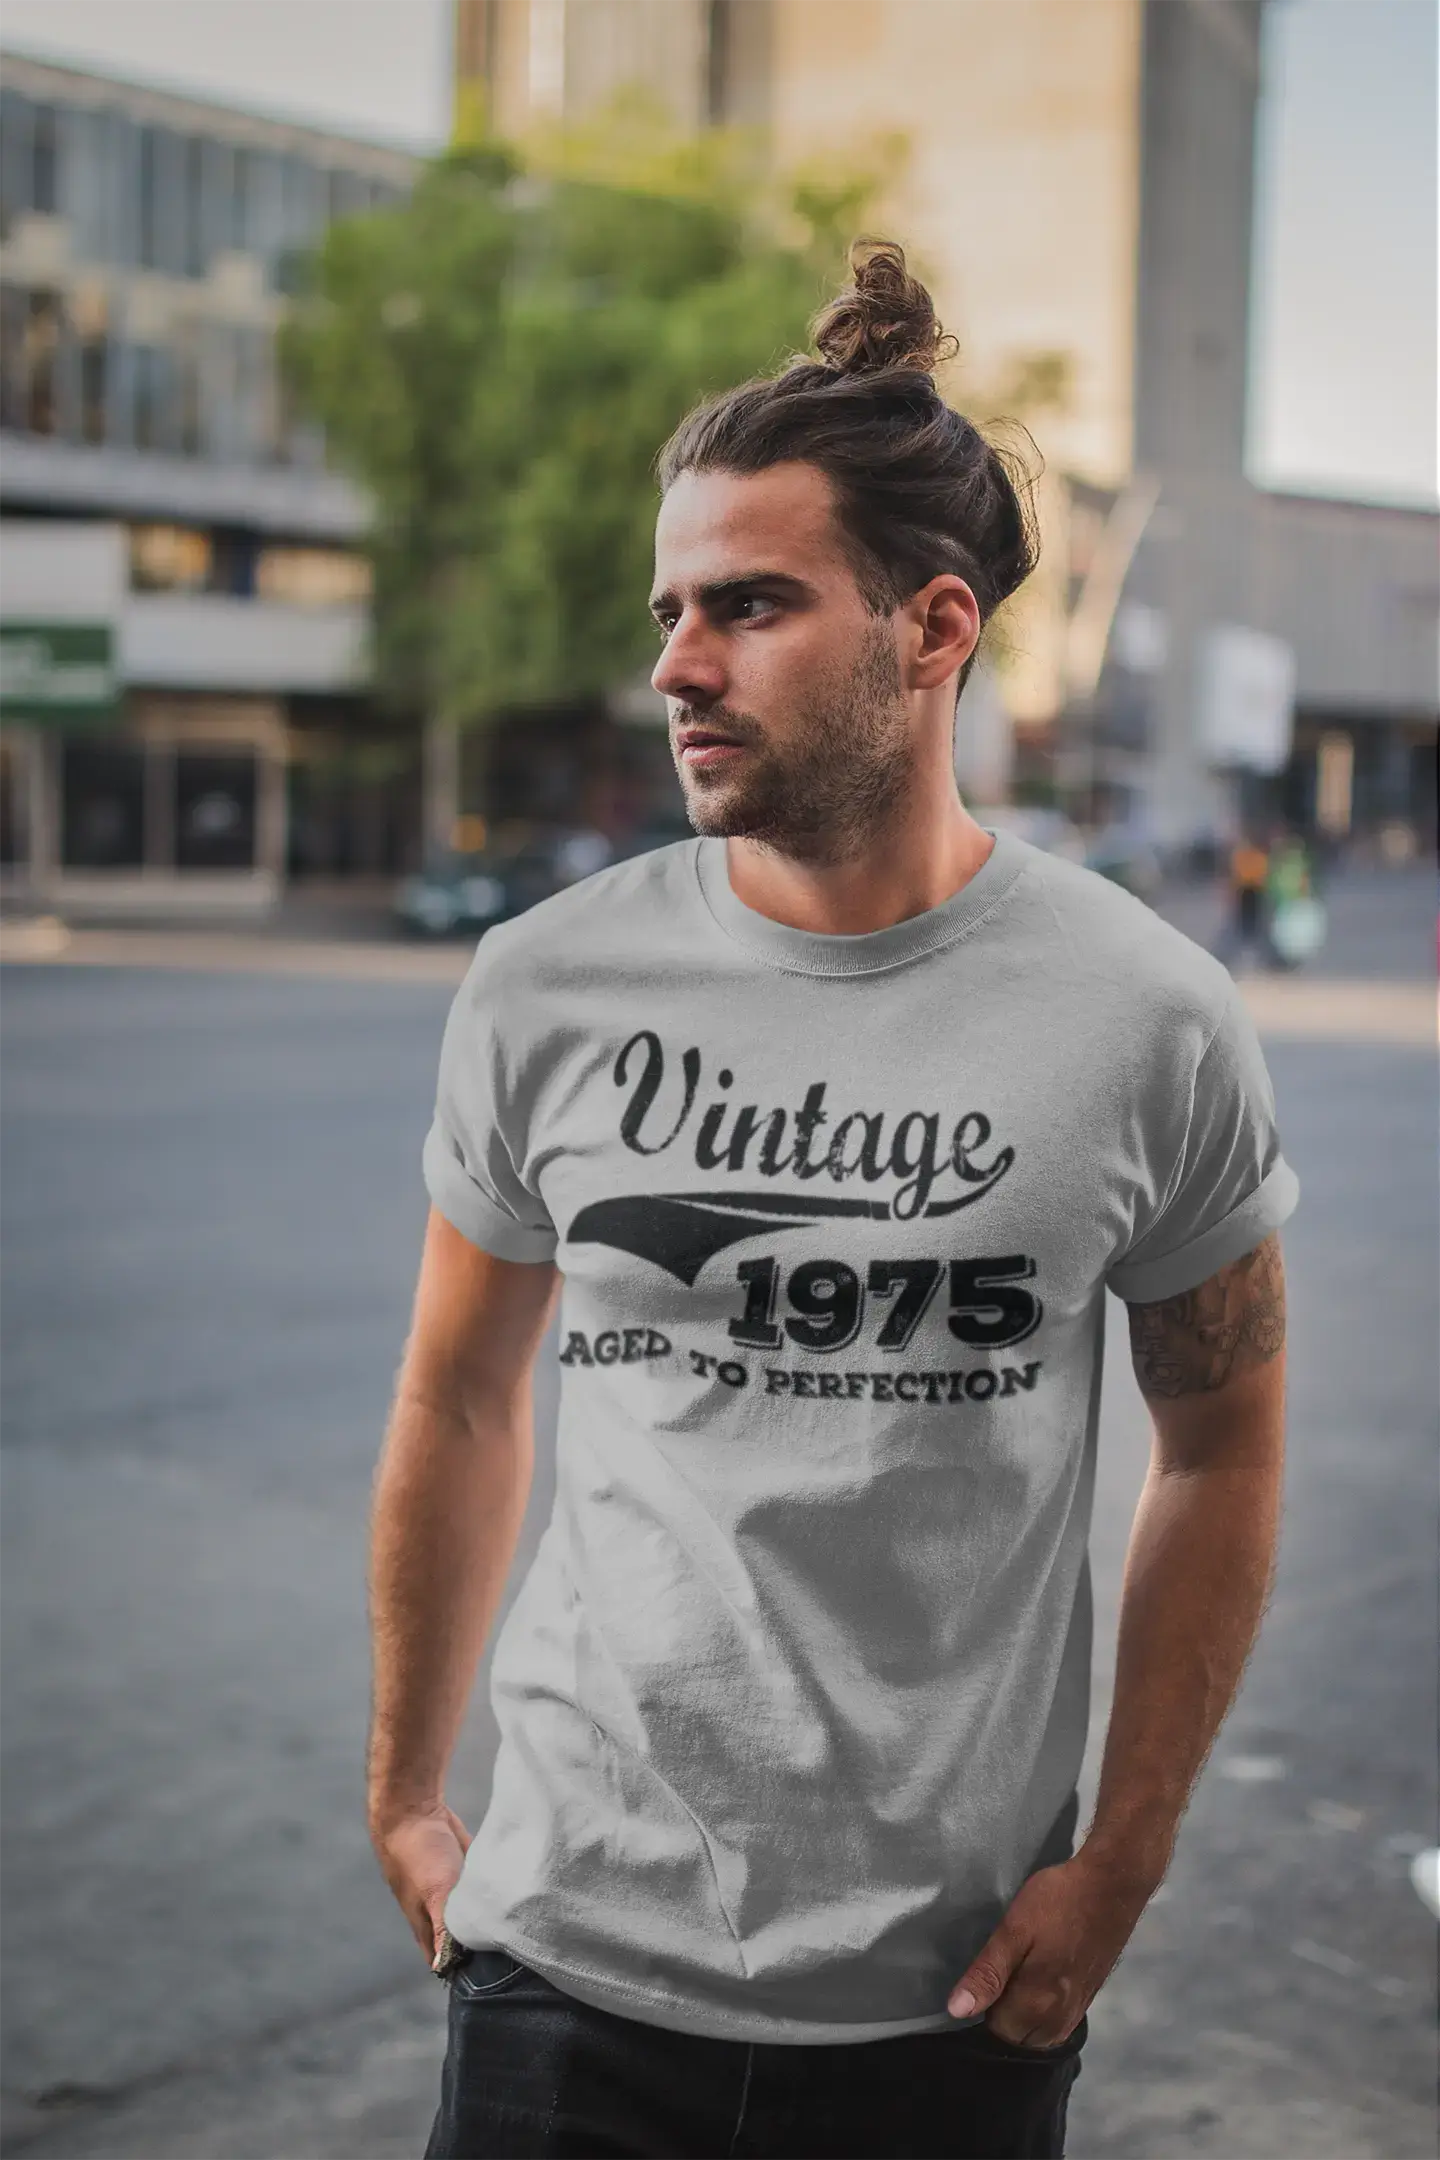 Vintage Aged to Perfection 1975, Grey, Men's Short Sleeve Round Neck T-shirt, gift t-shirt 00346